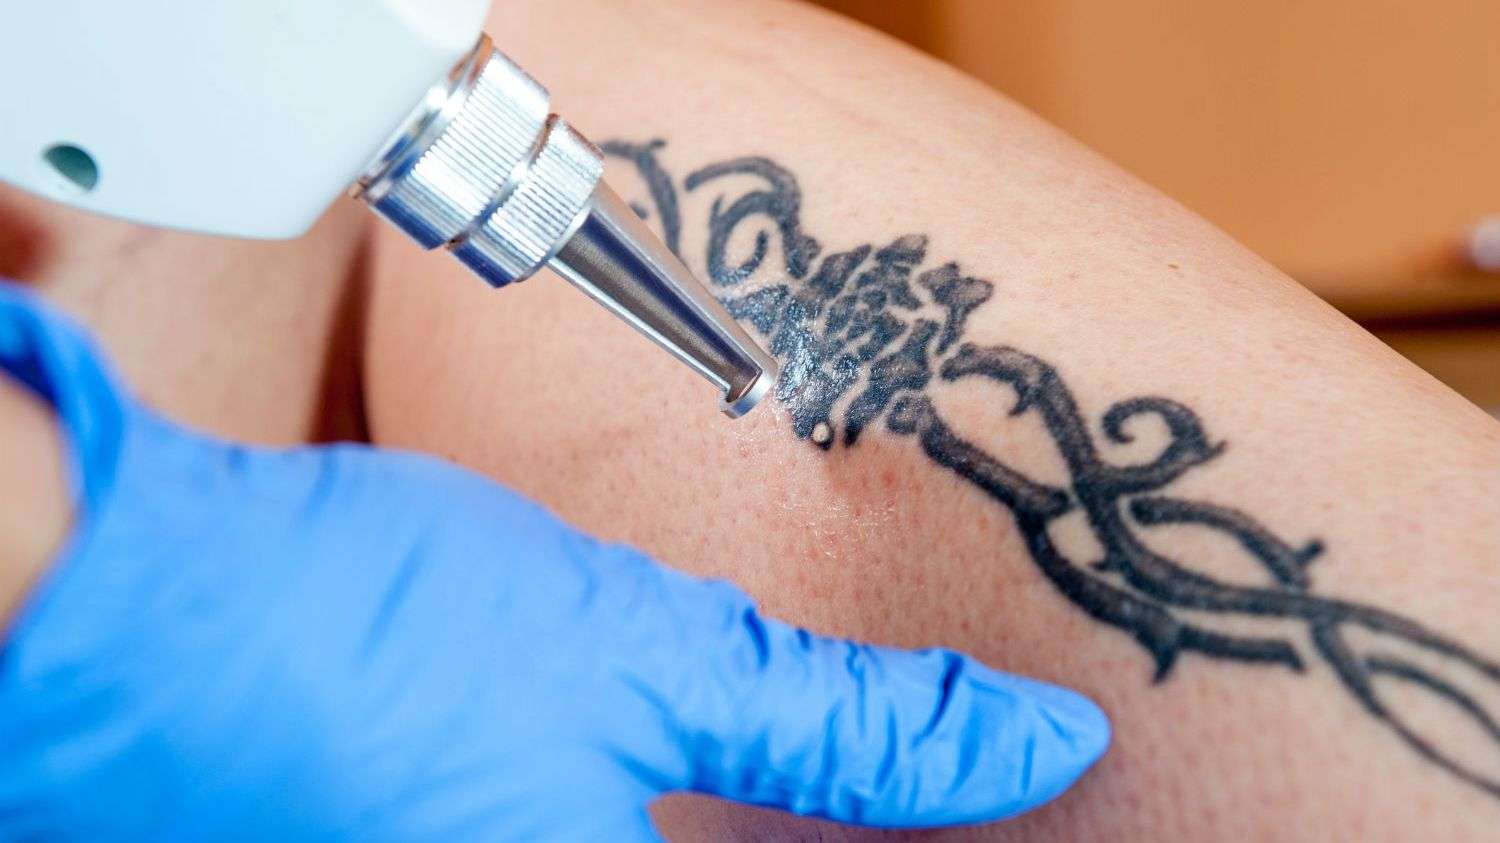 How Does Tattoo Removal Work?